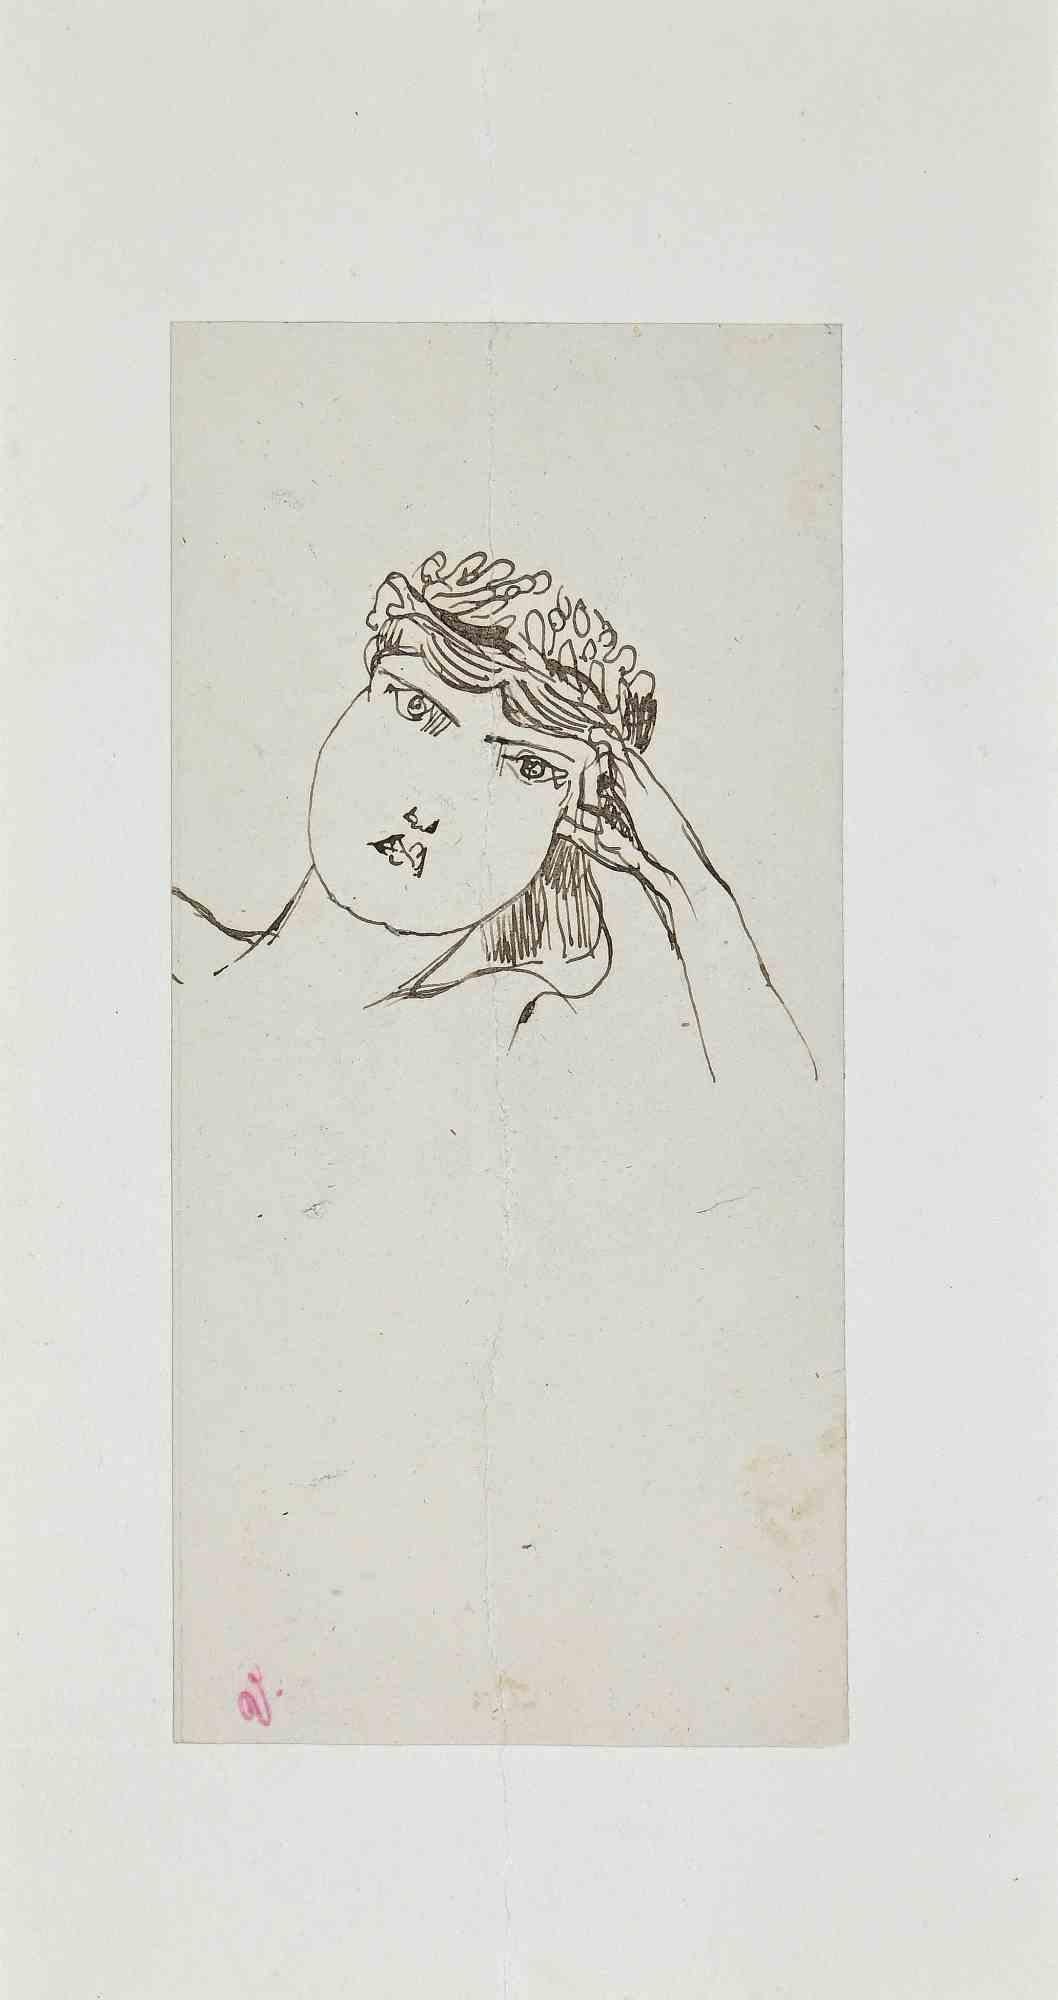 Unknown Figurative Art - The spring - Original Pen Drawing - Early 20th century